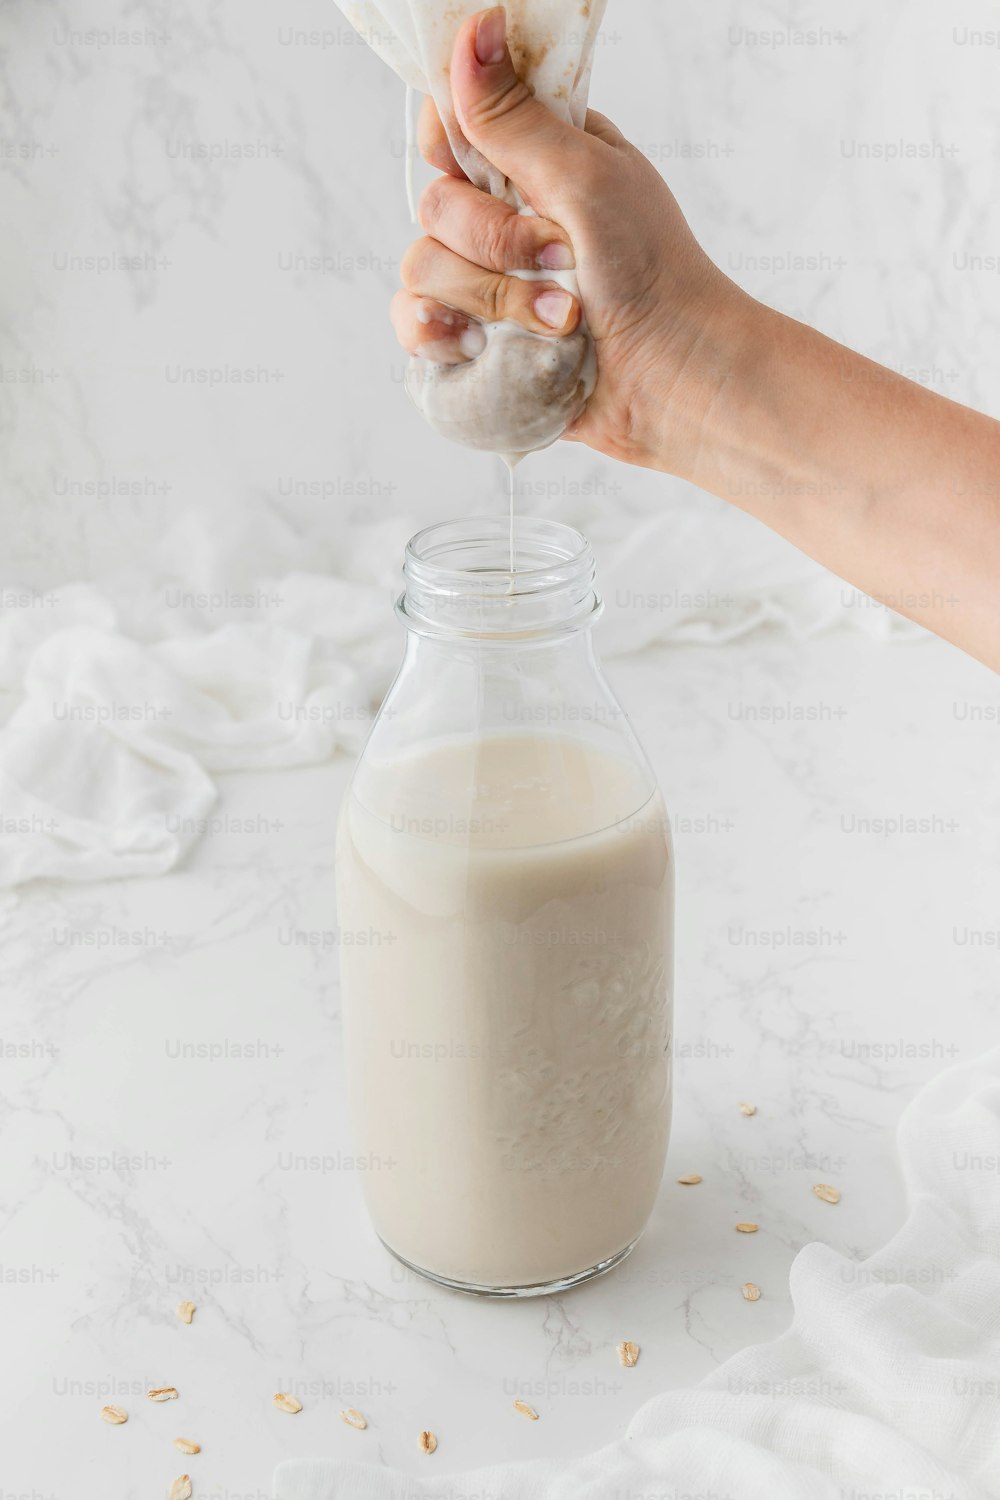 a person is pouring milk into a glass jar